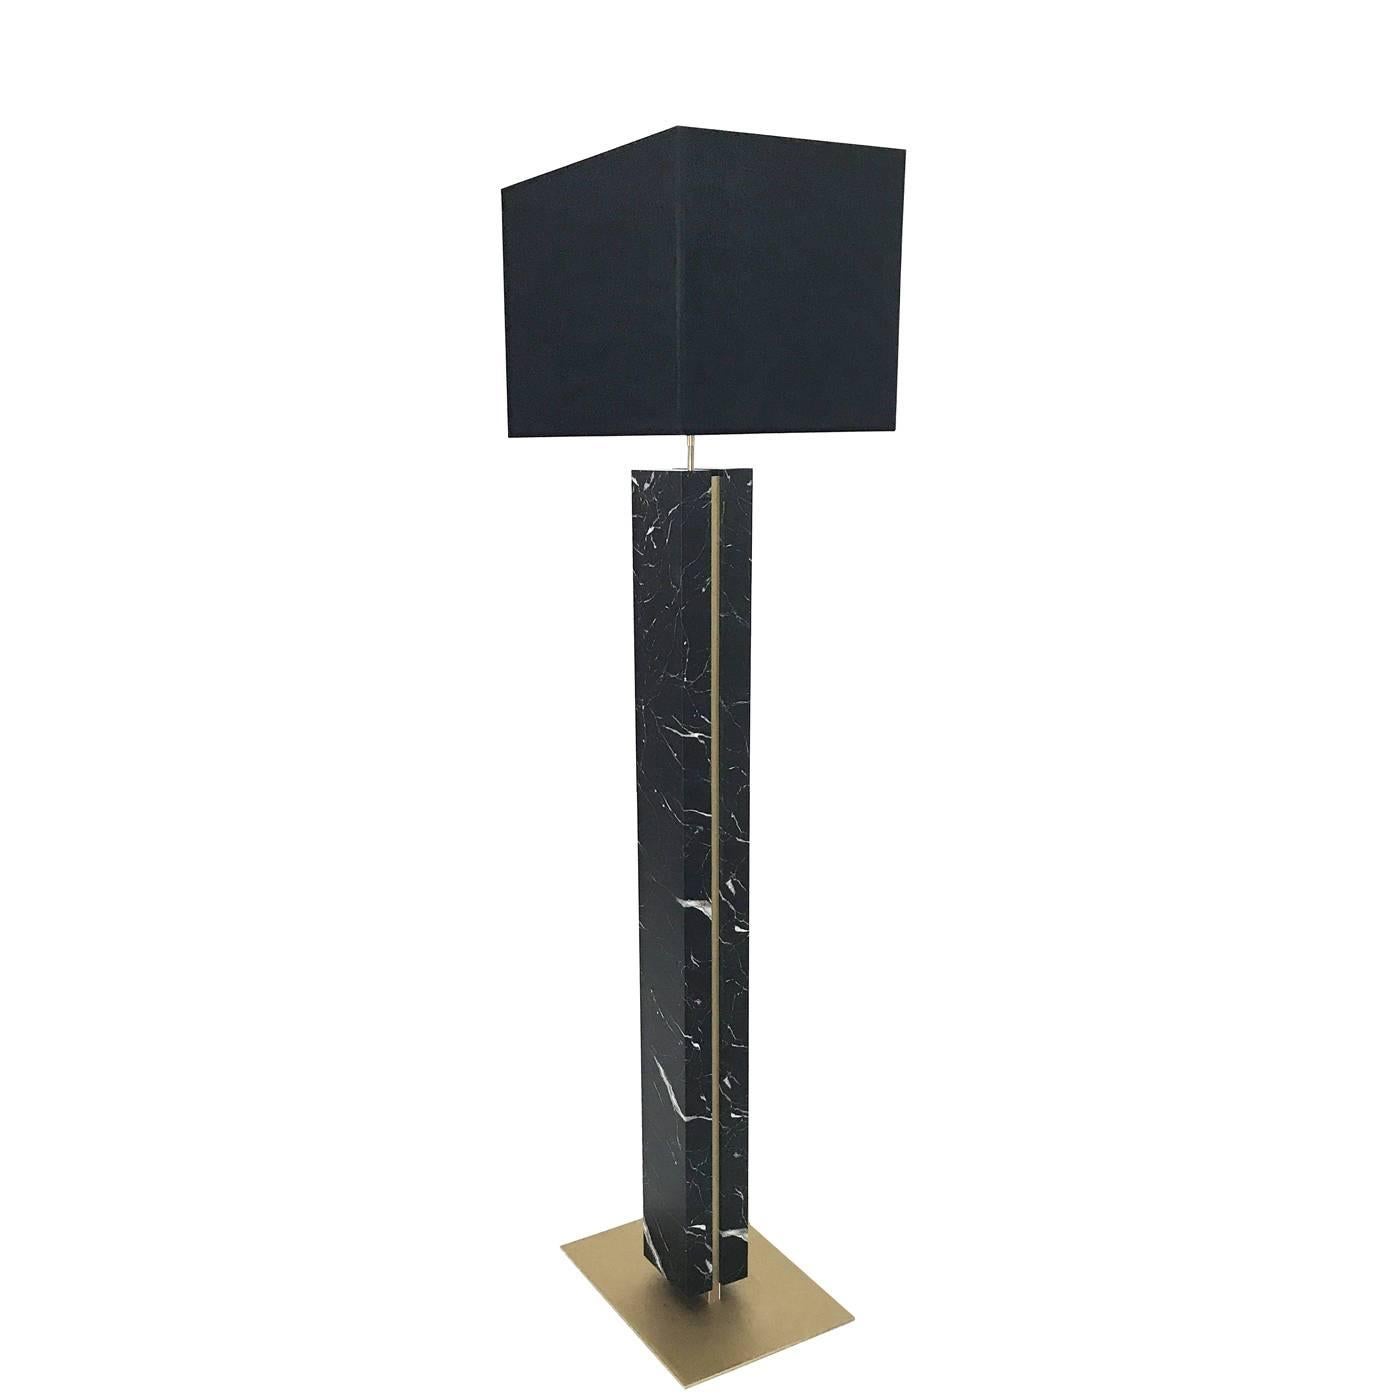 This superb floor lamp was made by hand by expert artisans using black Saint Laurent marble, whose luxurious Fine surface is covered in thin white and golden veins. The structure in brass complements the stone and comprises a square base and an